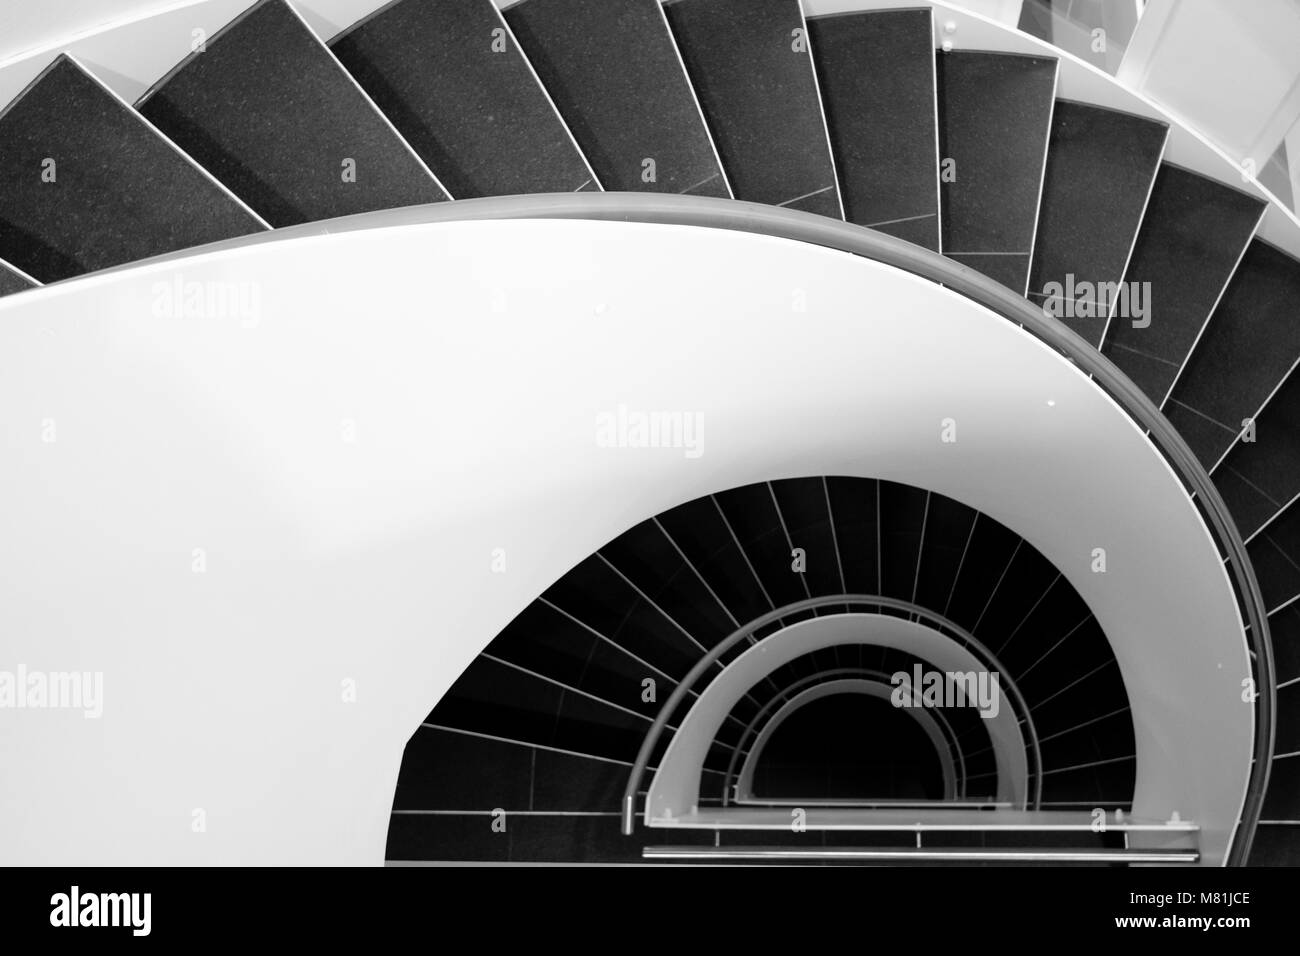 Spiral staircase in a modern building in black and white Stock Photo